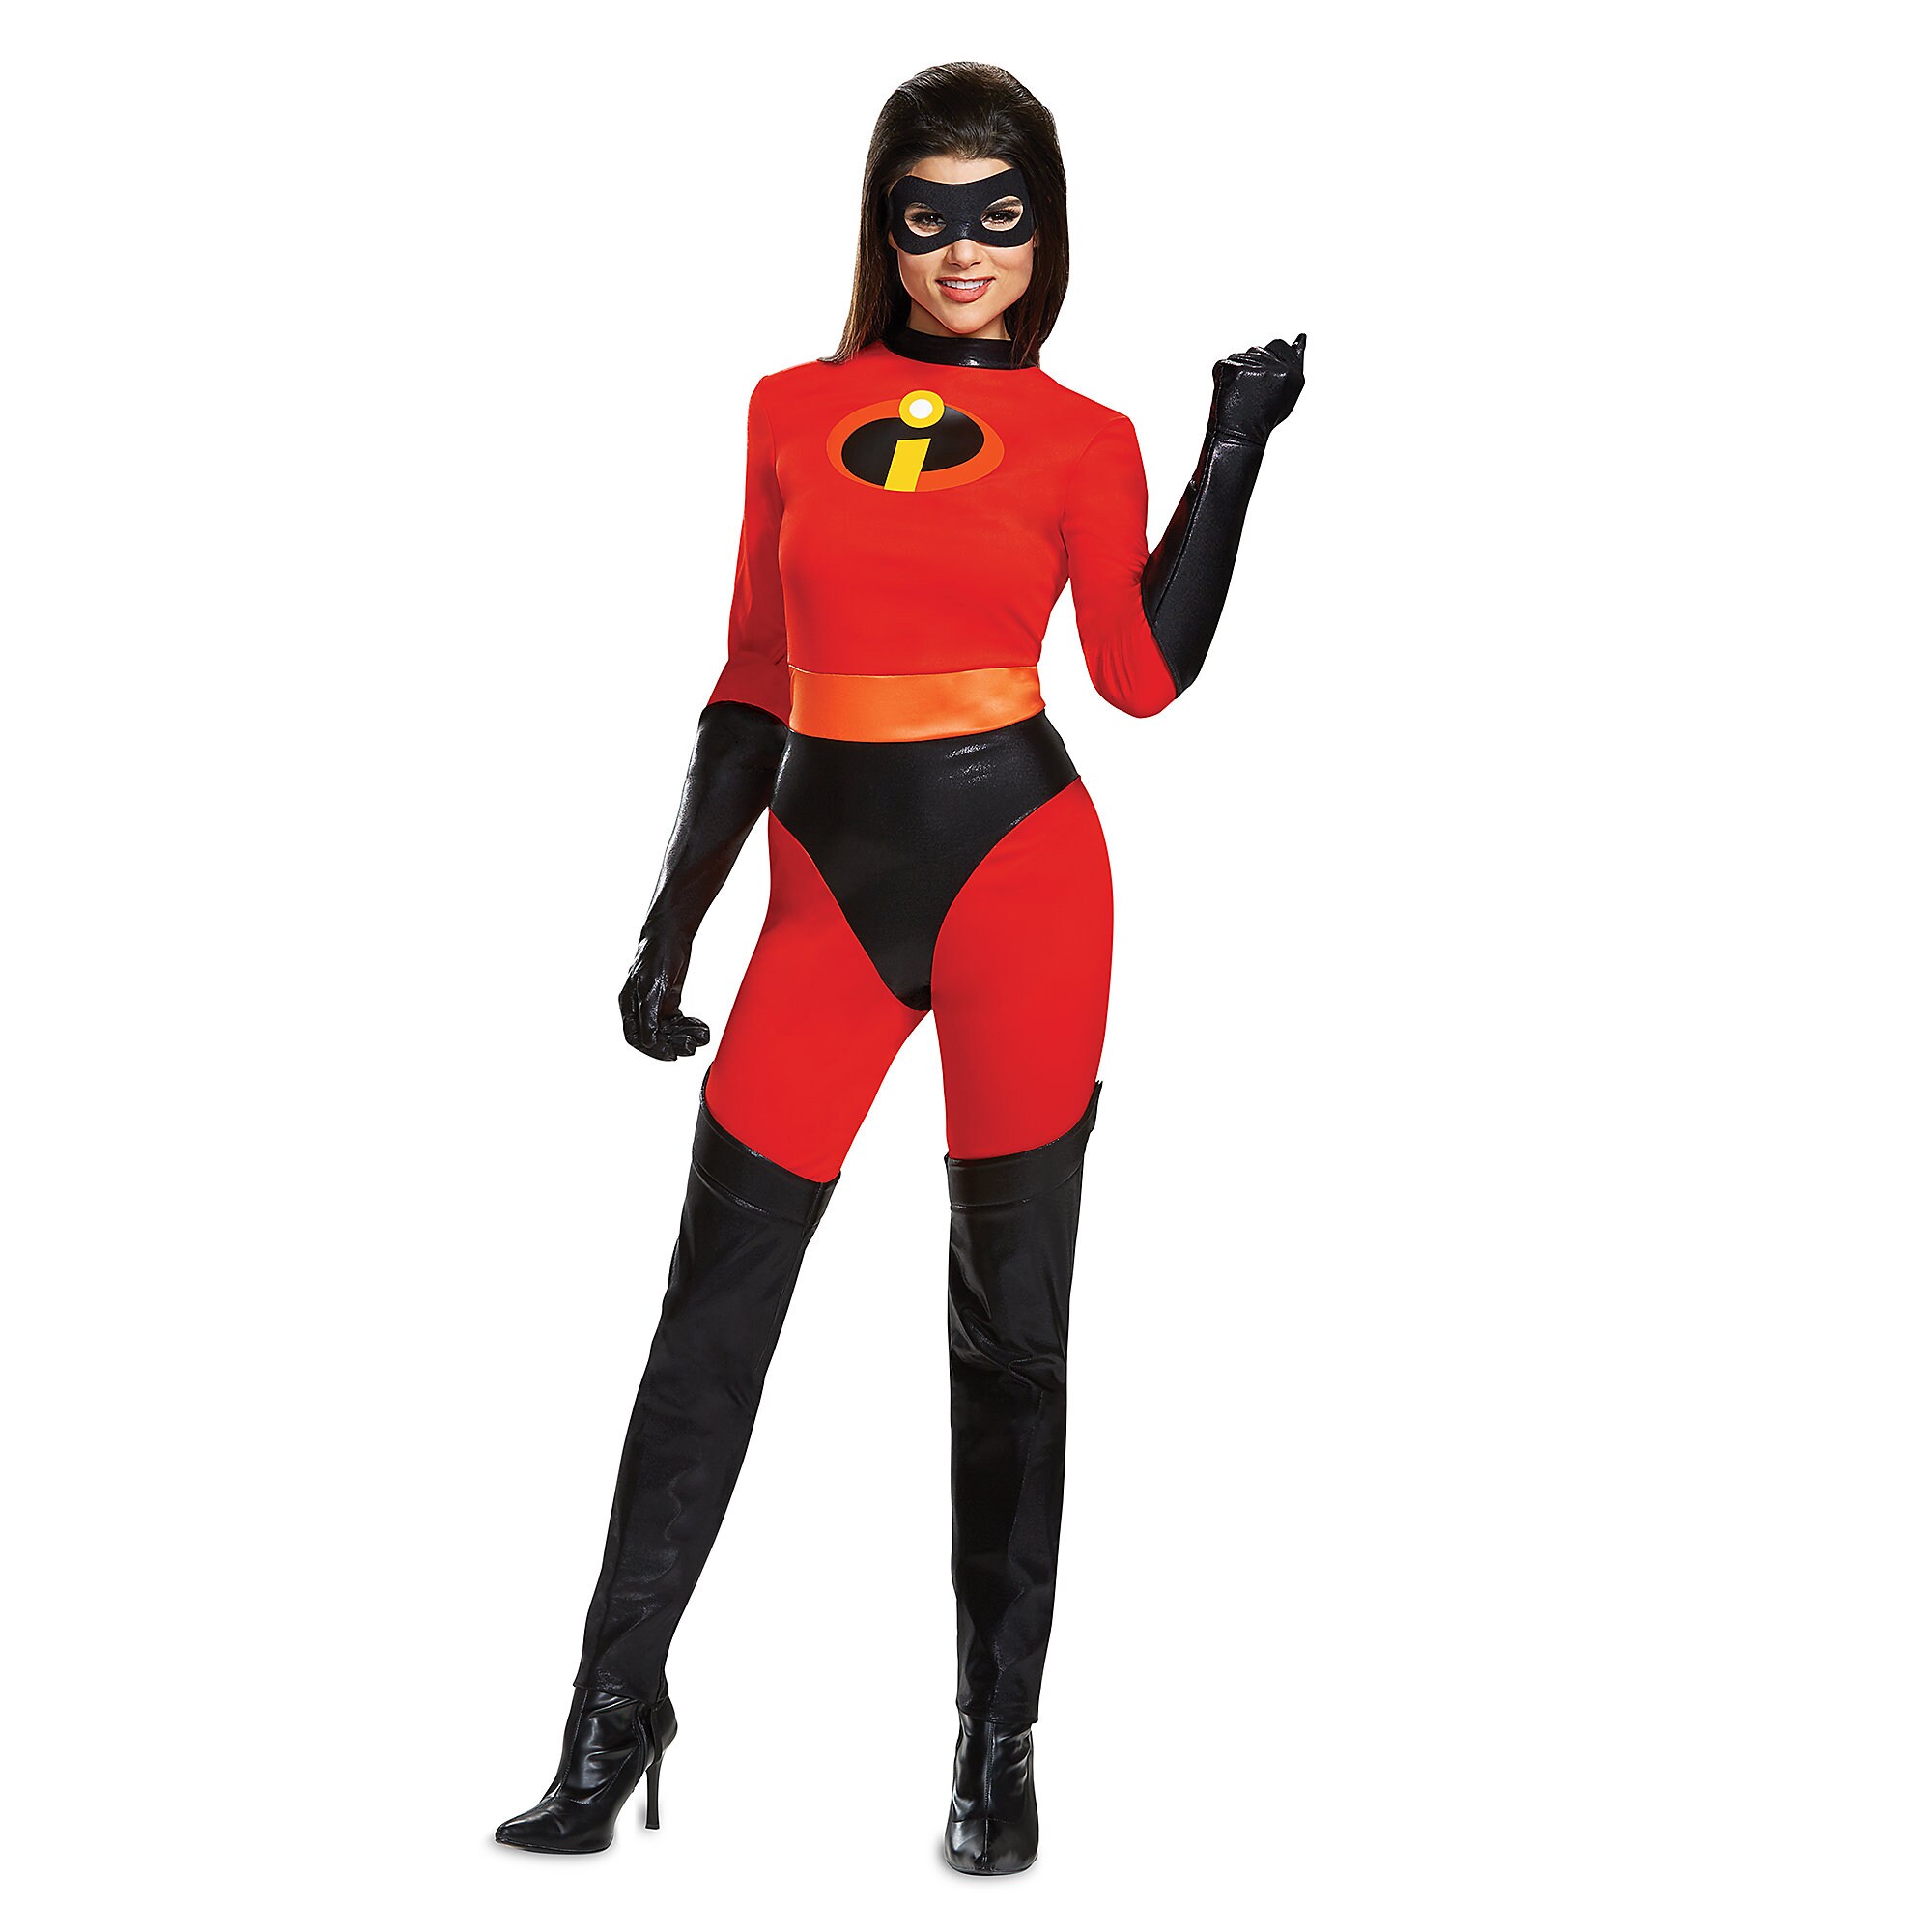 Mrs. Incredible Deluxe Costume for Adults by Disguise